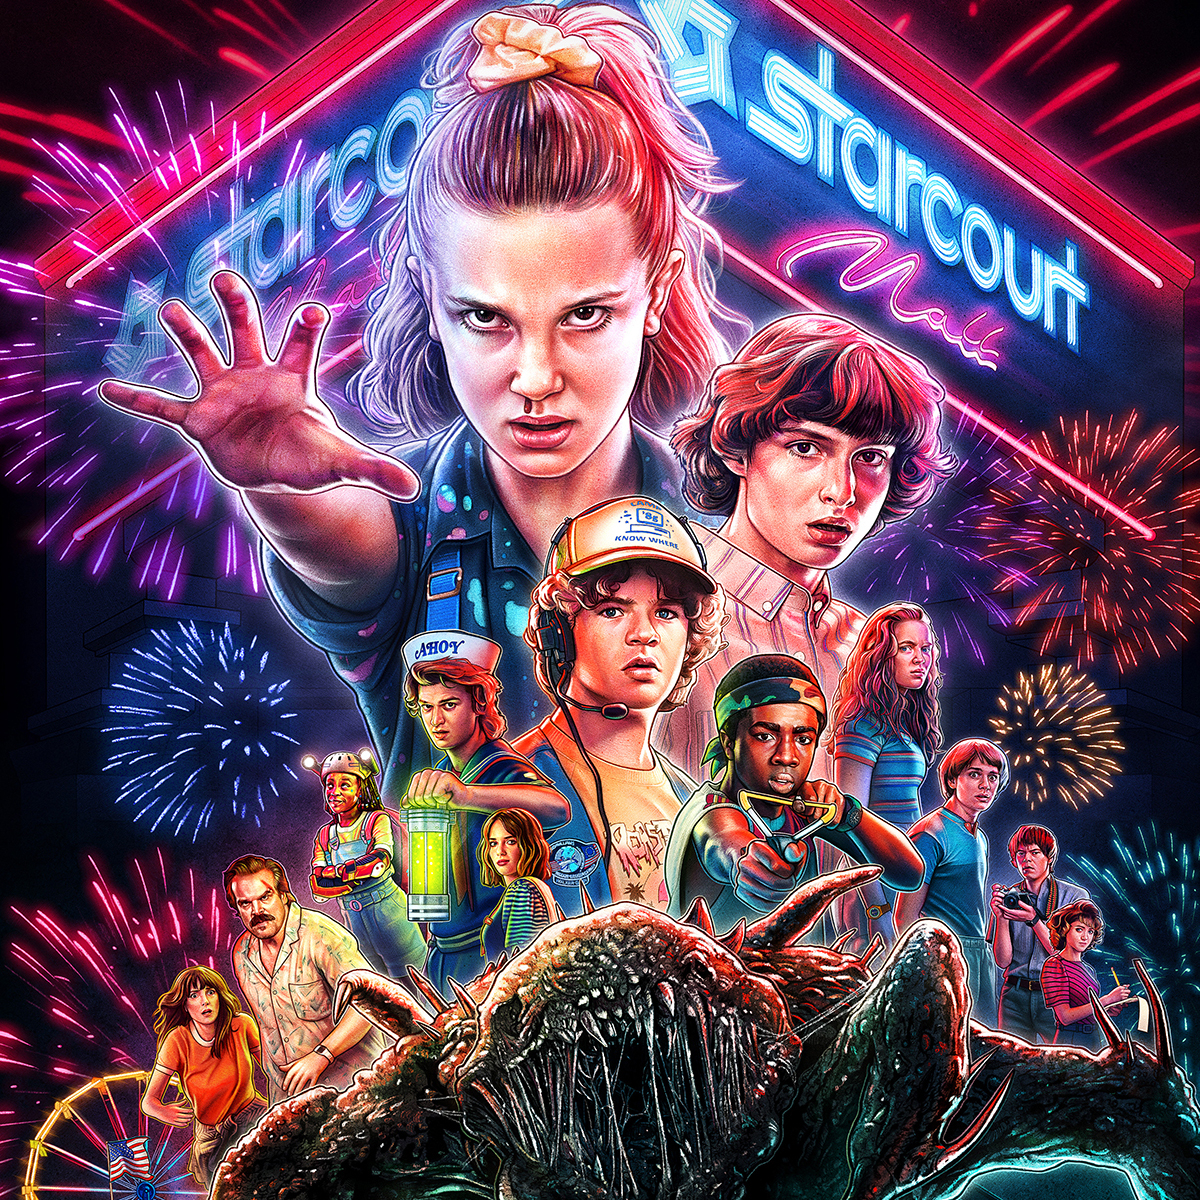 Netflix goes all out for Stranger Things Season 4